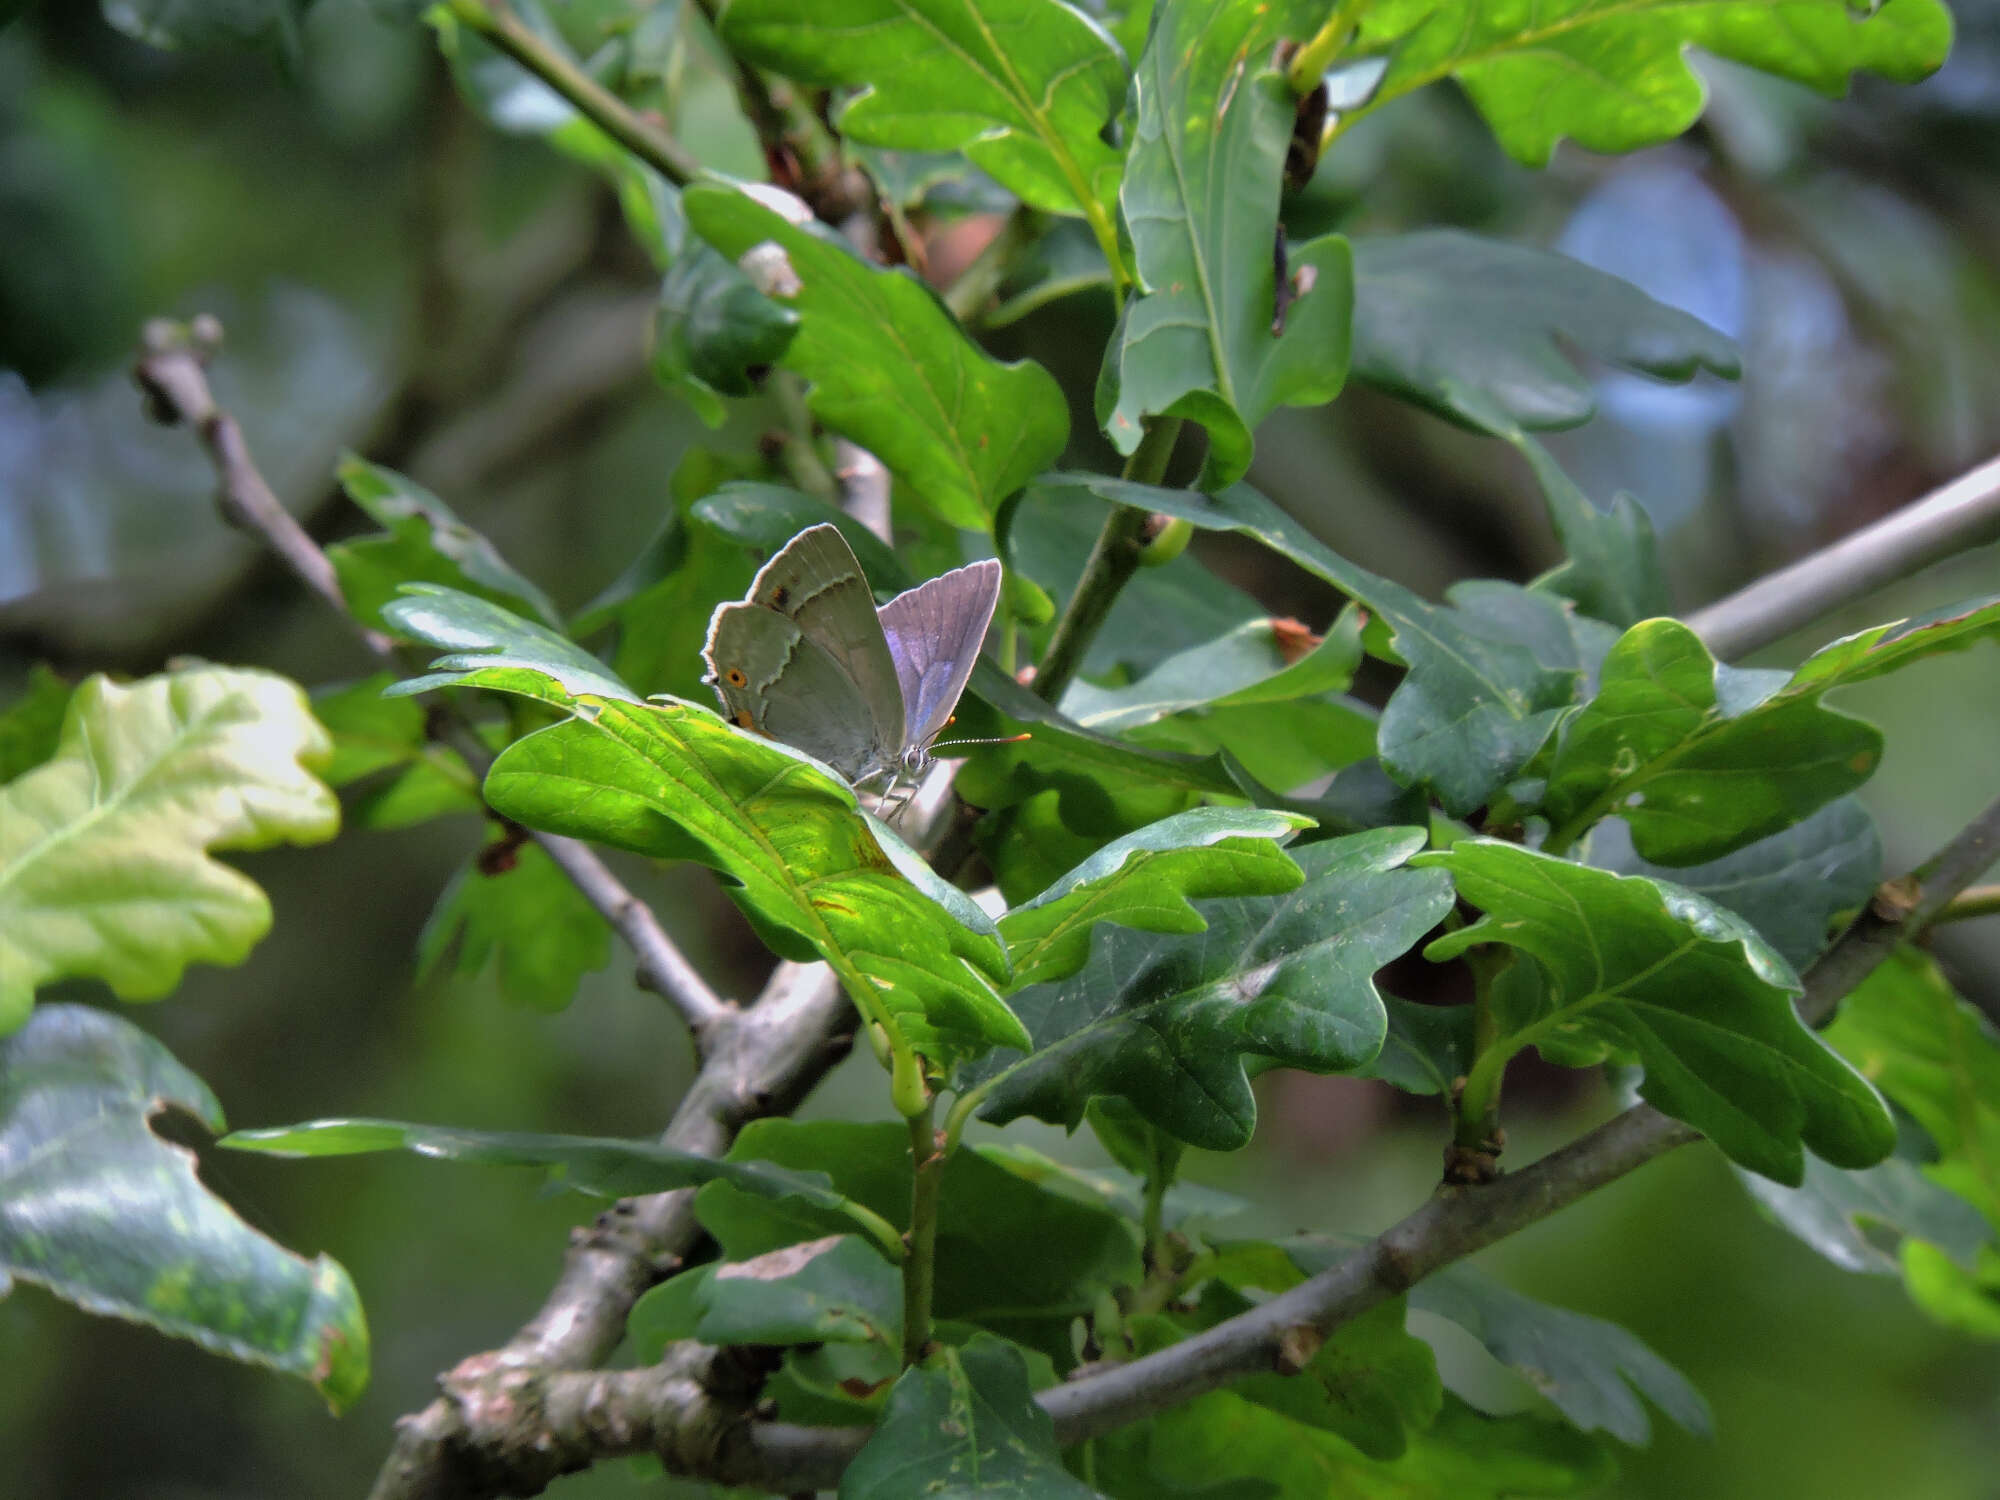 Our biggest success story to date was the unexpected arrival of the Purple Hairstreak .They colonised our oaks and we later found that they had laid eggs!